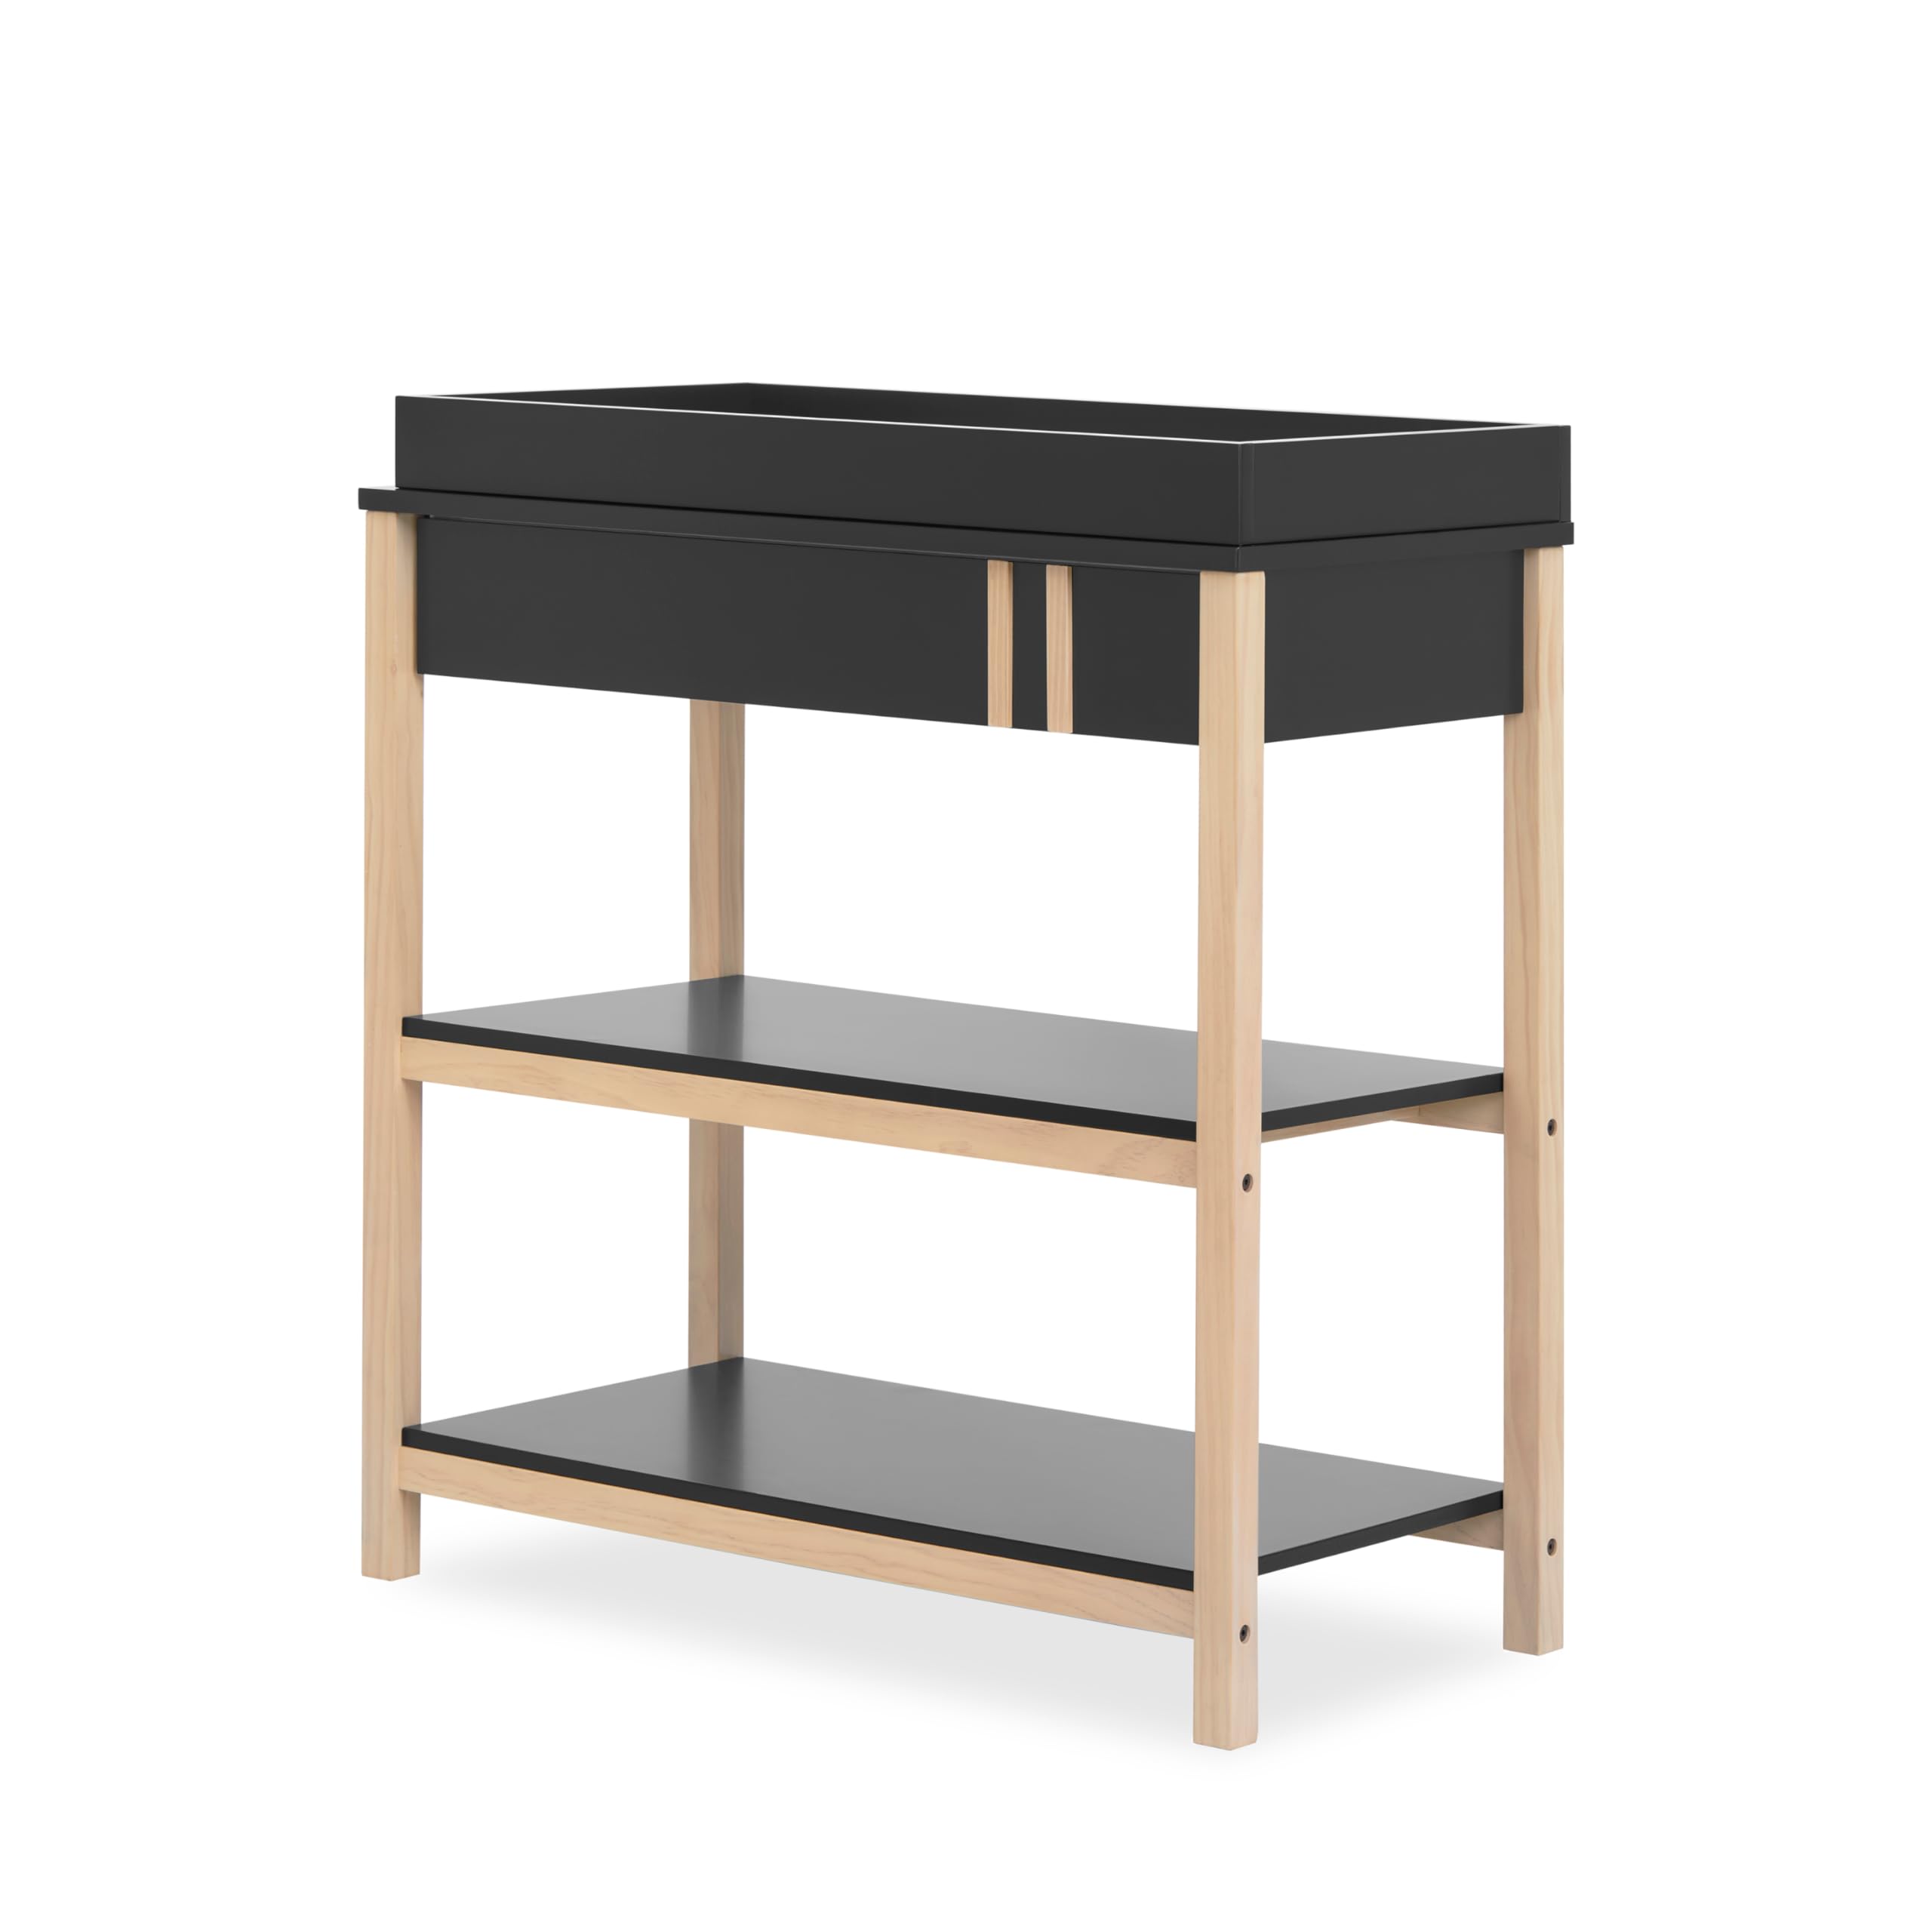 Dream On Me Soho Changing Table in Matte Black Vintage, Crafted with Sustainable New Zealand Pinewood